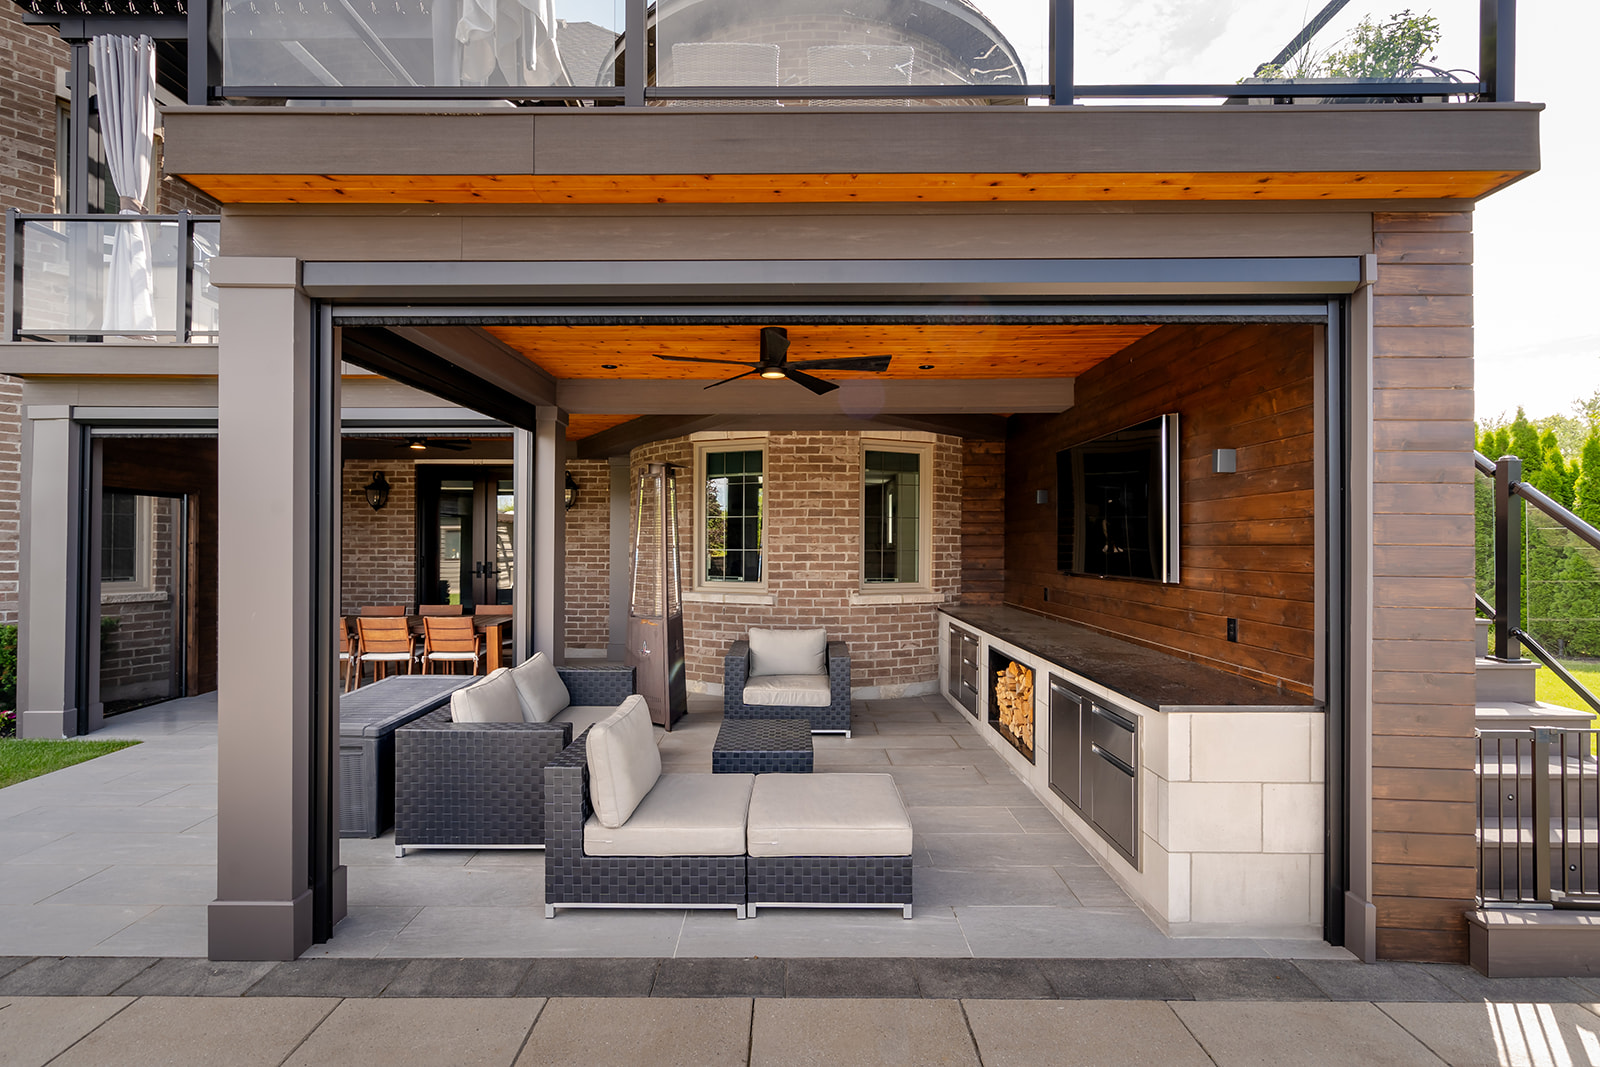 An outdoor patio set underneath a deck with a fan on the ceiling and an outdoor table on the left.